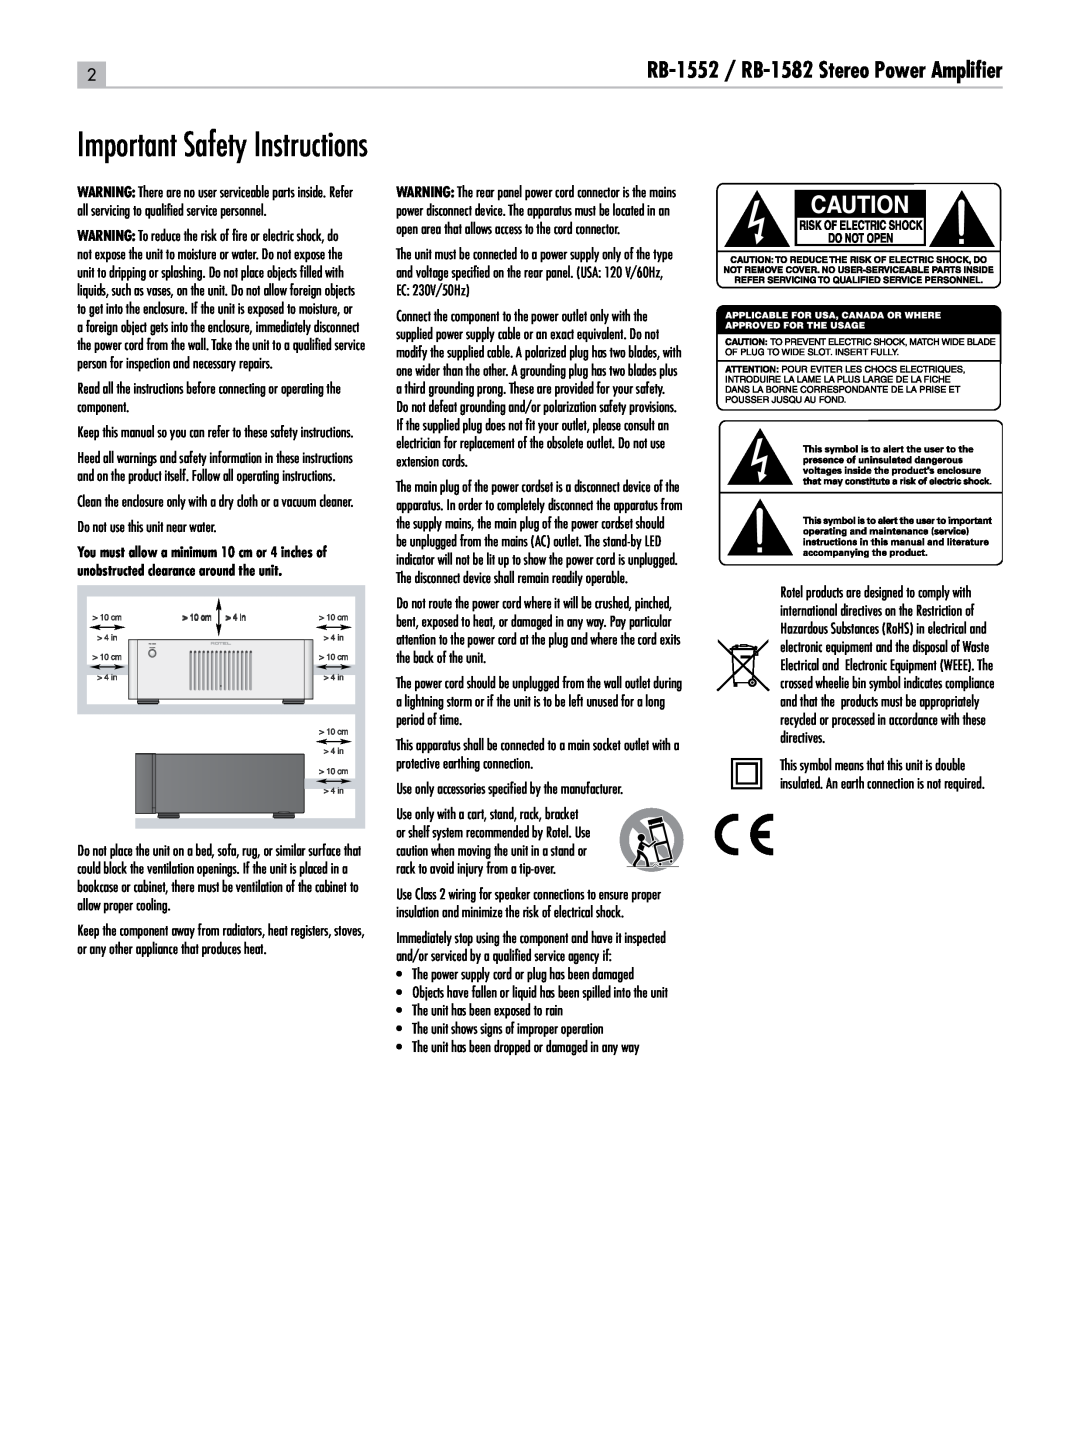 Rotel owner manual Important Safety Instructions, RB-1552 / RB-1582Stereo Power Amplifier 